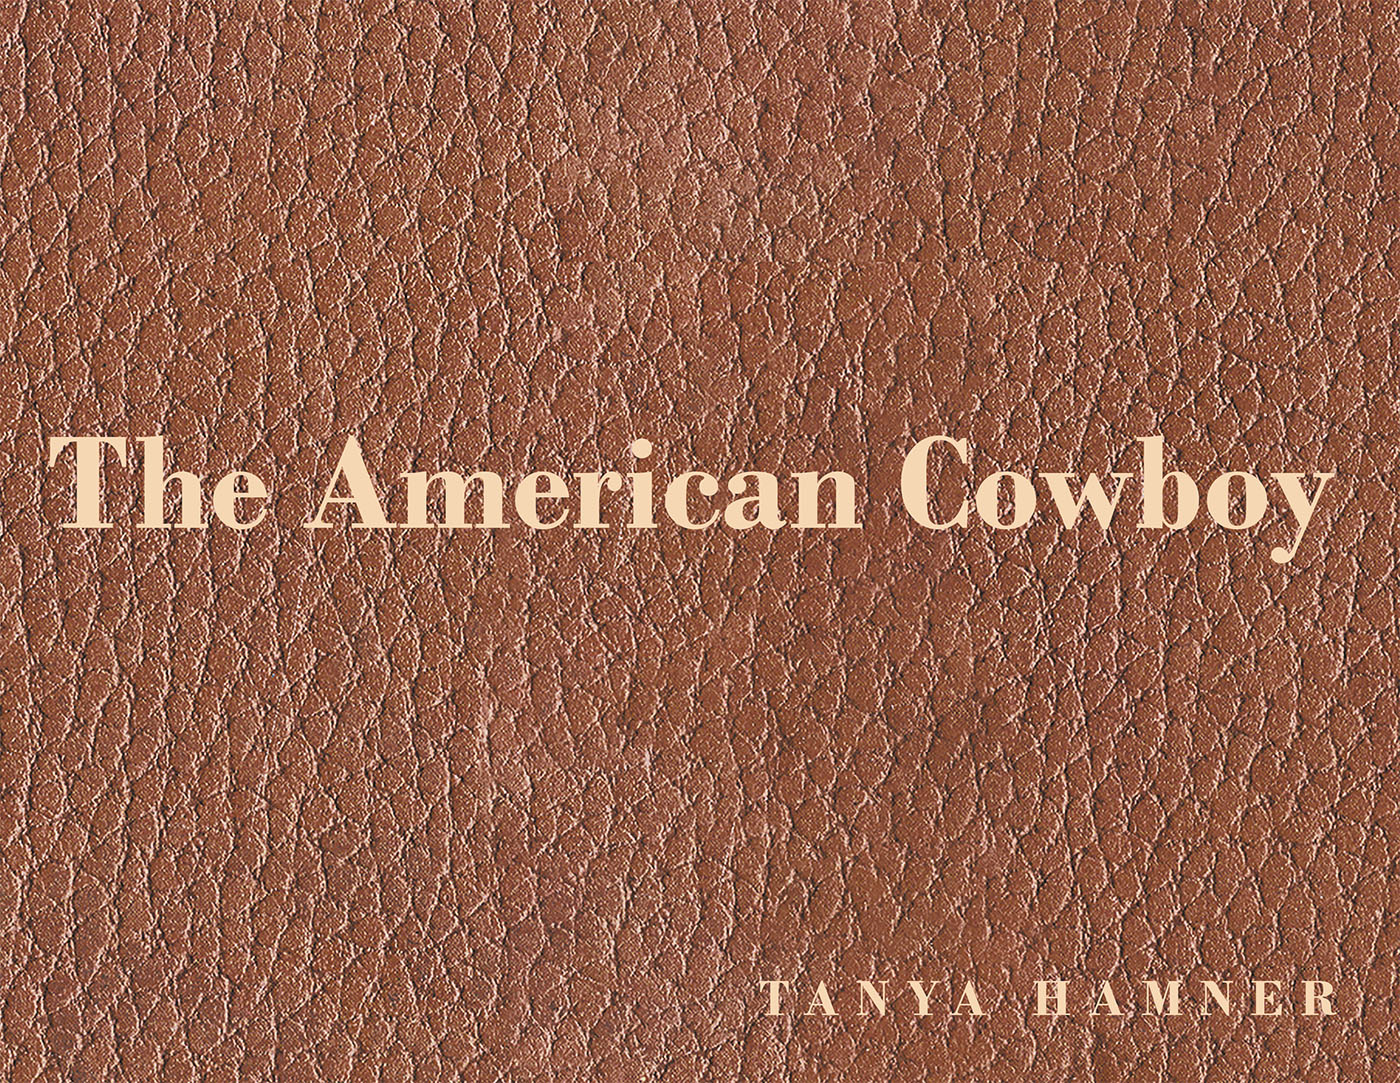 Author Tanya Hamner’s New Book, "The American Cowboy," Features Photographs That Serve as a Testament to the Cowboy Life, Defined by Hard Work in God’s Glorious Country